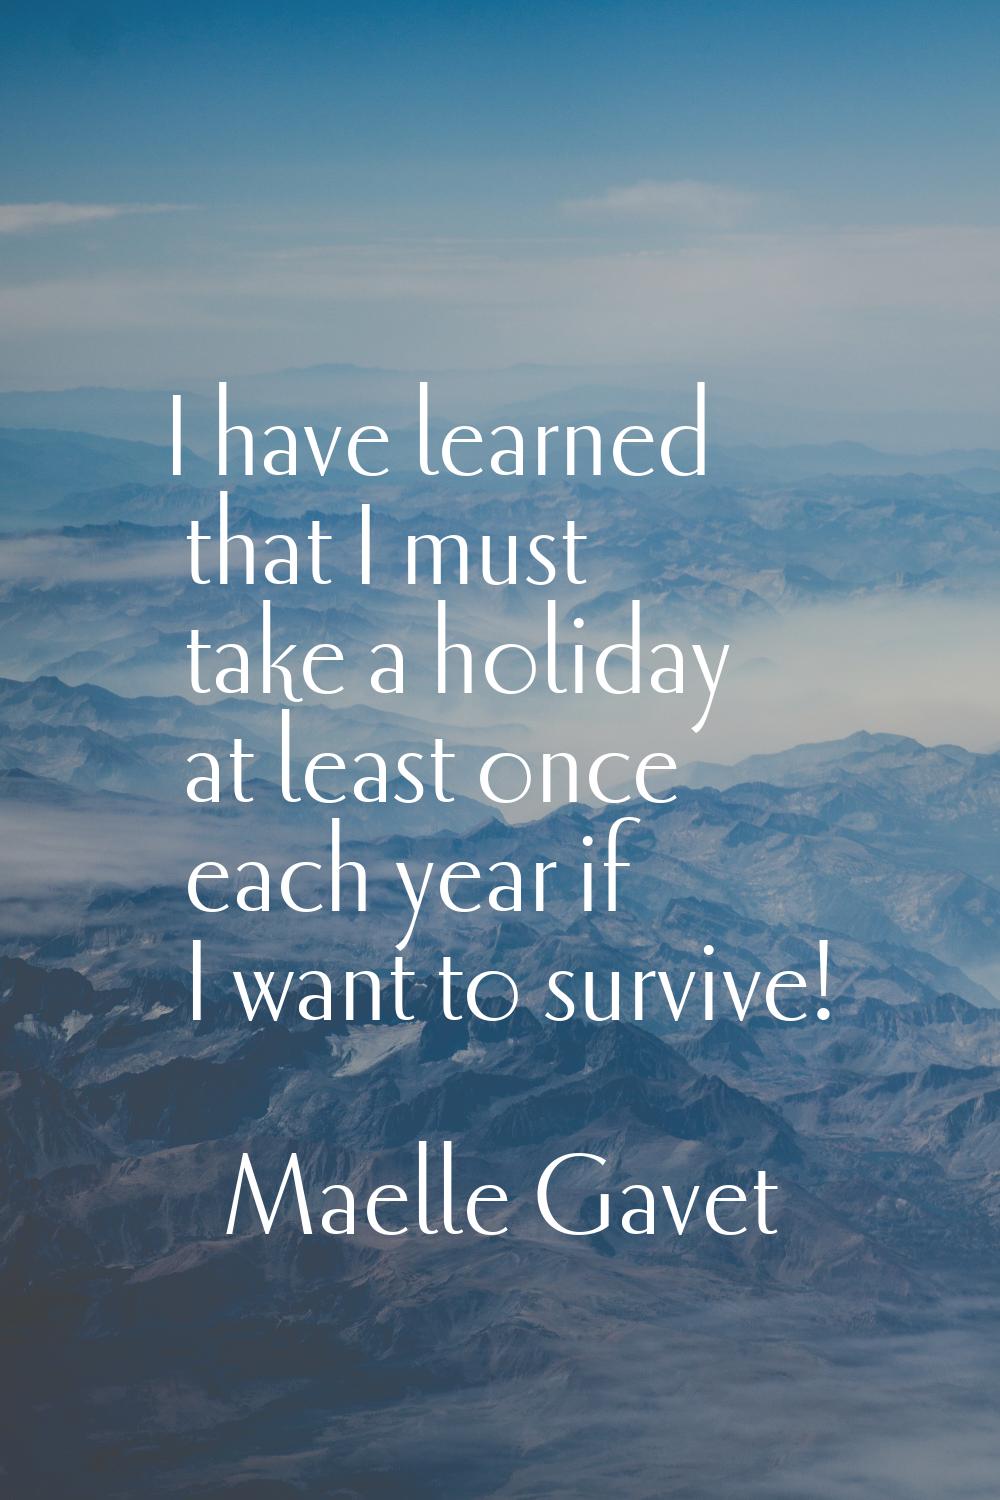 I have learned that I must take a holiday at least once each year if I want to survive!